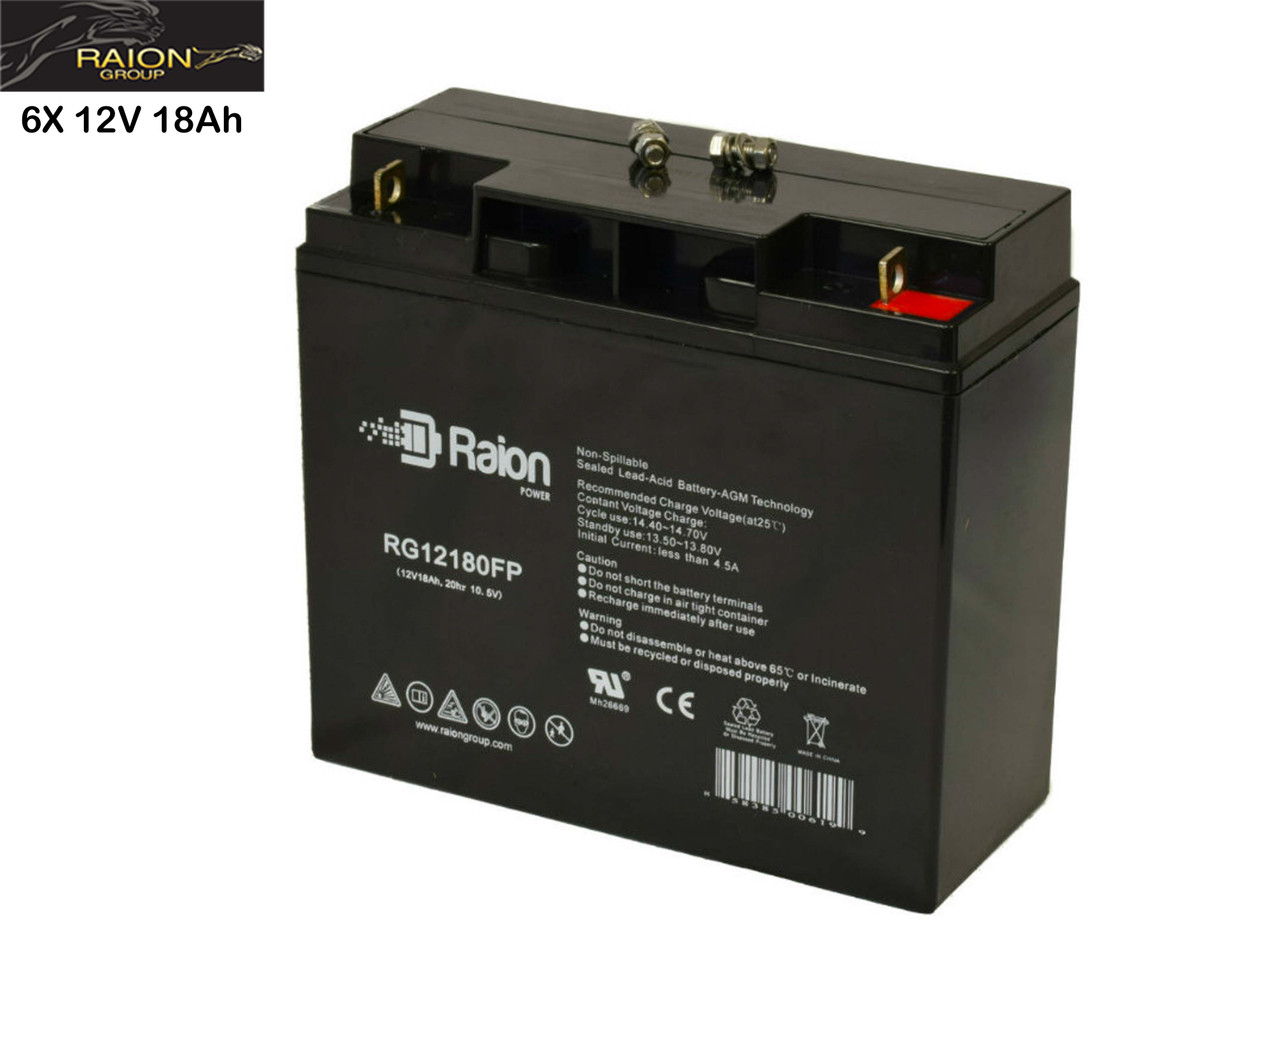 Raion Power Replacement 12V 18Ah Battery for Daymak Boston - 6 Pack